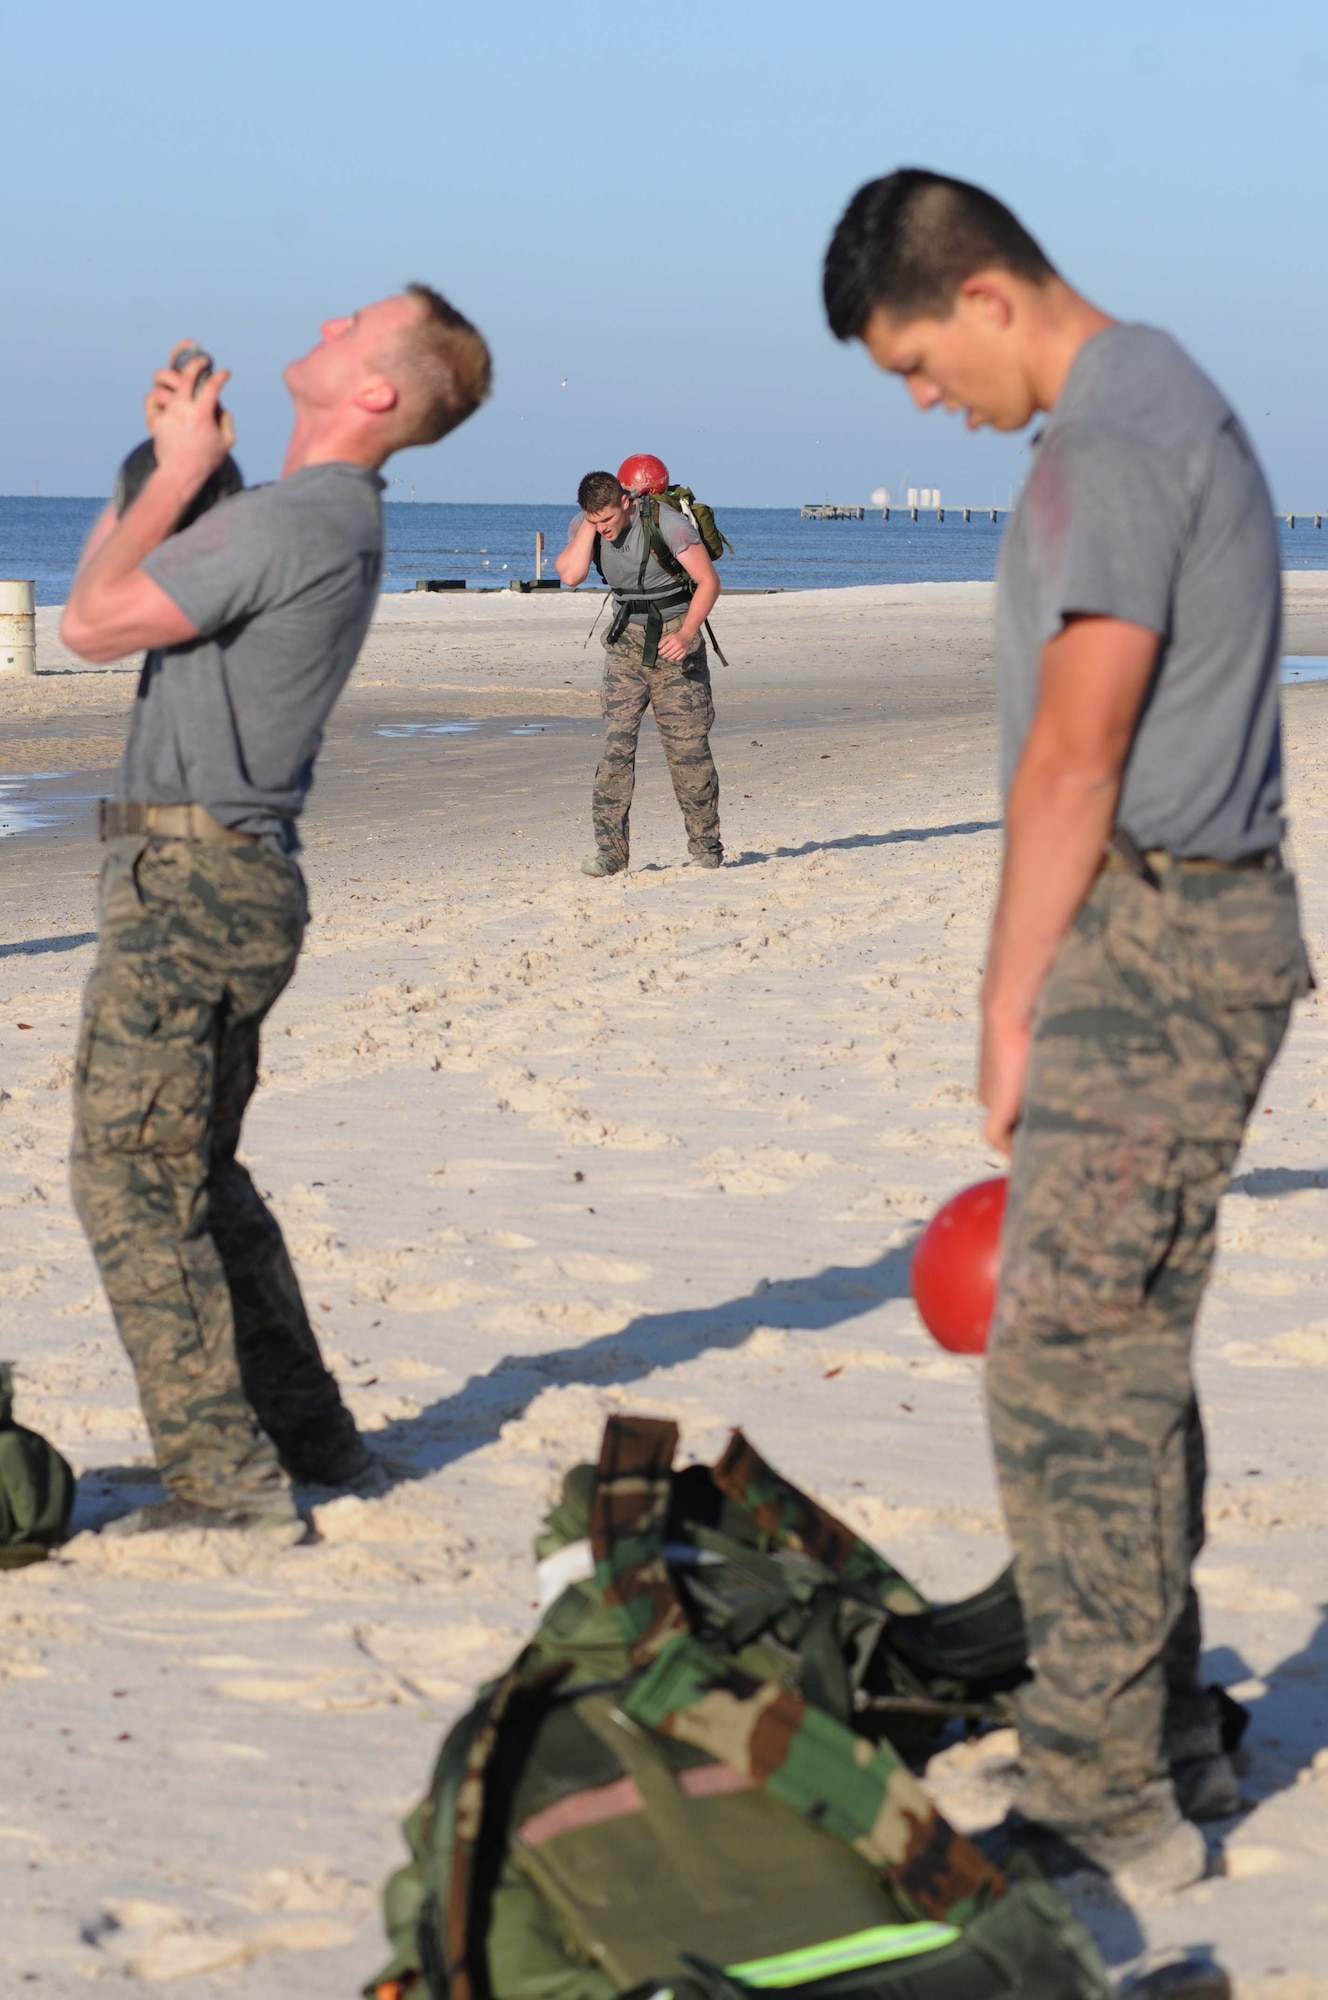 Combat control trainees from the 334th Training Squadron use kettlebells for various workouts during a physical training session April 12, 2013, on Biloxi beach.  Combat controllers are ground troops who are embedded with special forces teams and provide close-air support for special forces units. While at Keesler, trainees learn how to run, swim, carry a rucksack and conduct air traffic control. These Airmen are prepared physically and mentally for the demands of the combat controller pipeline while earning air traffic control certification in just 15 weeks.  (U.S. Air Force photo by Kemberly Groue)